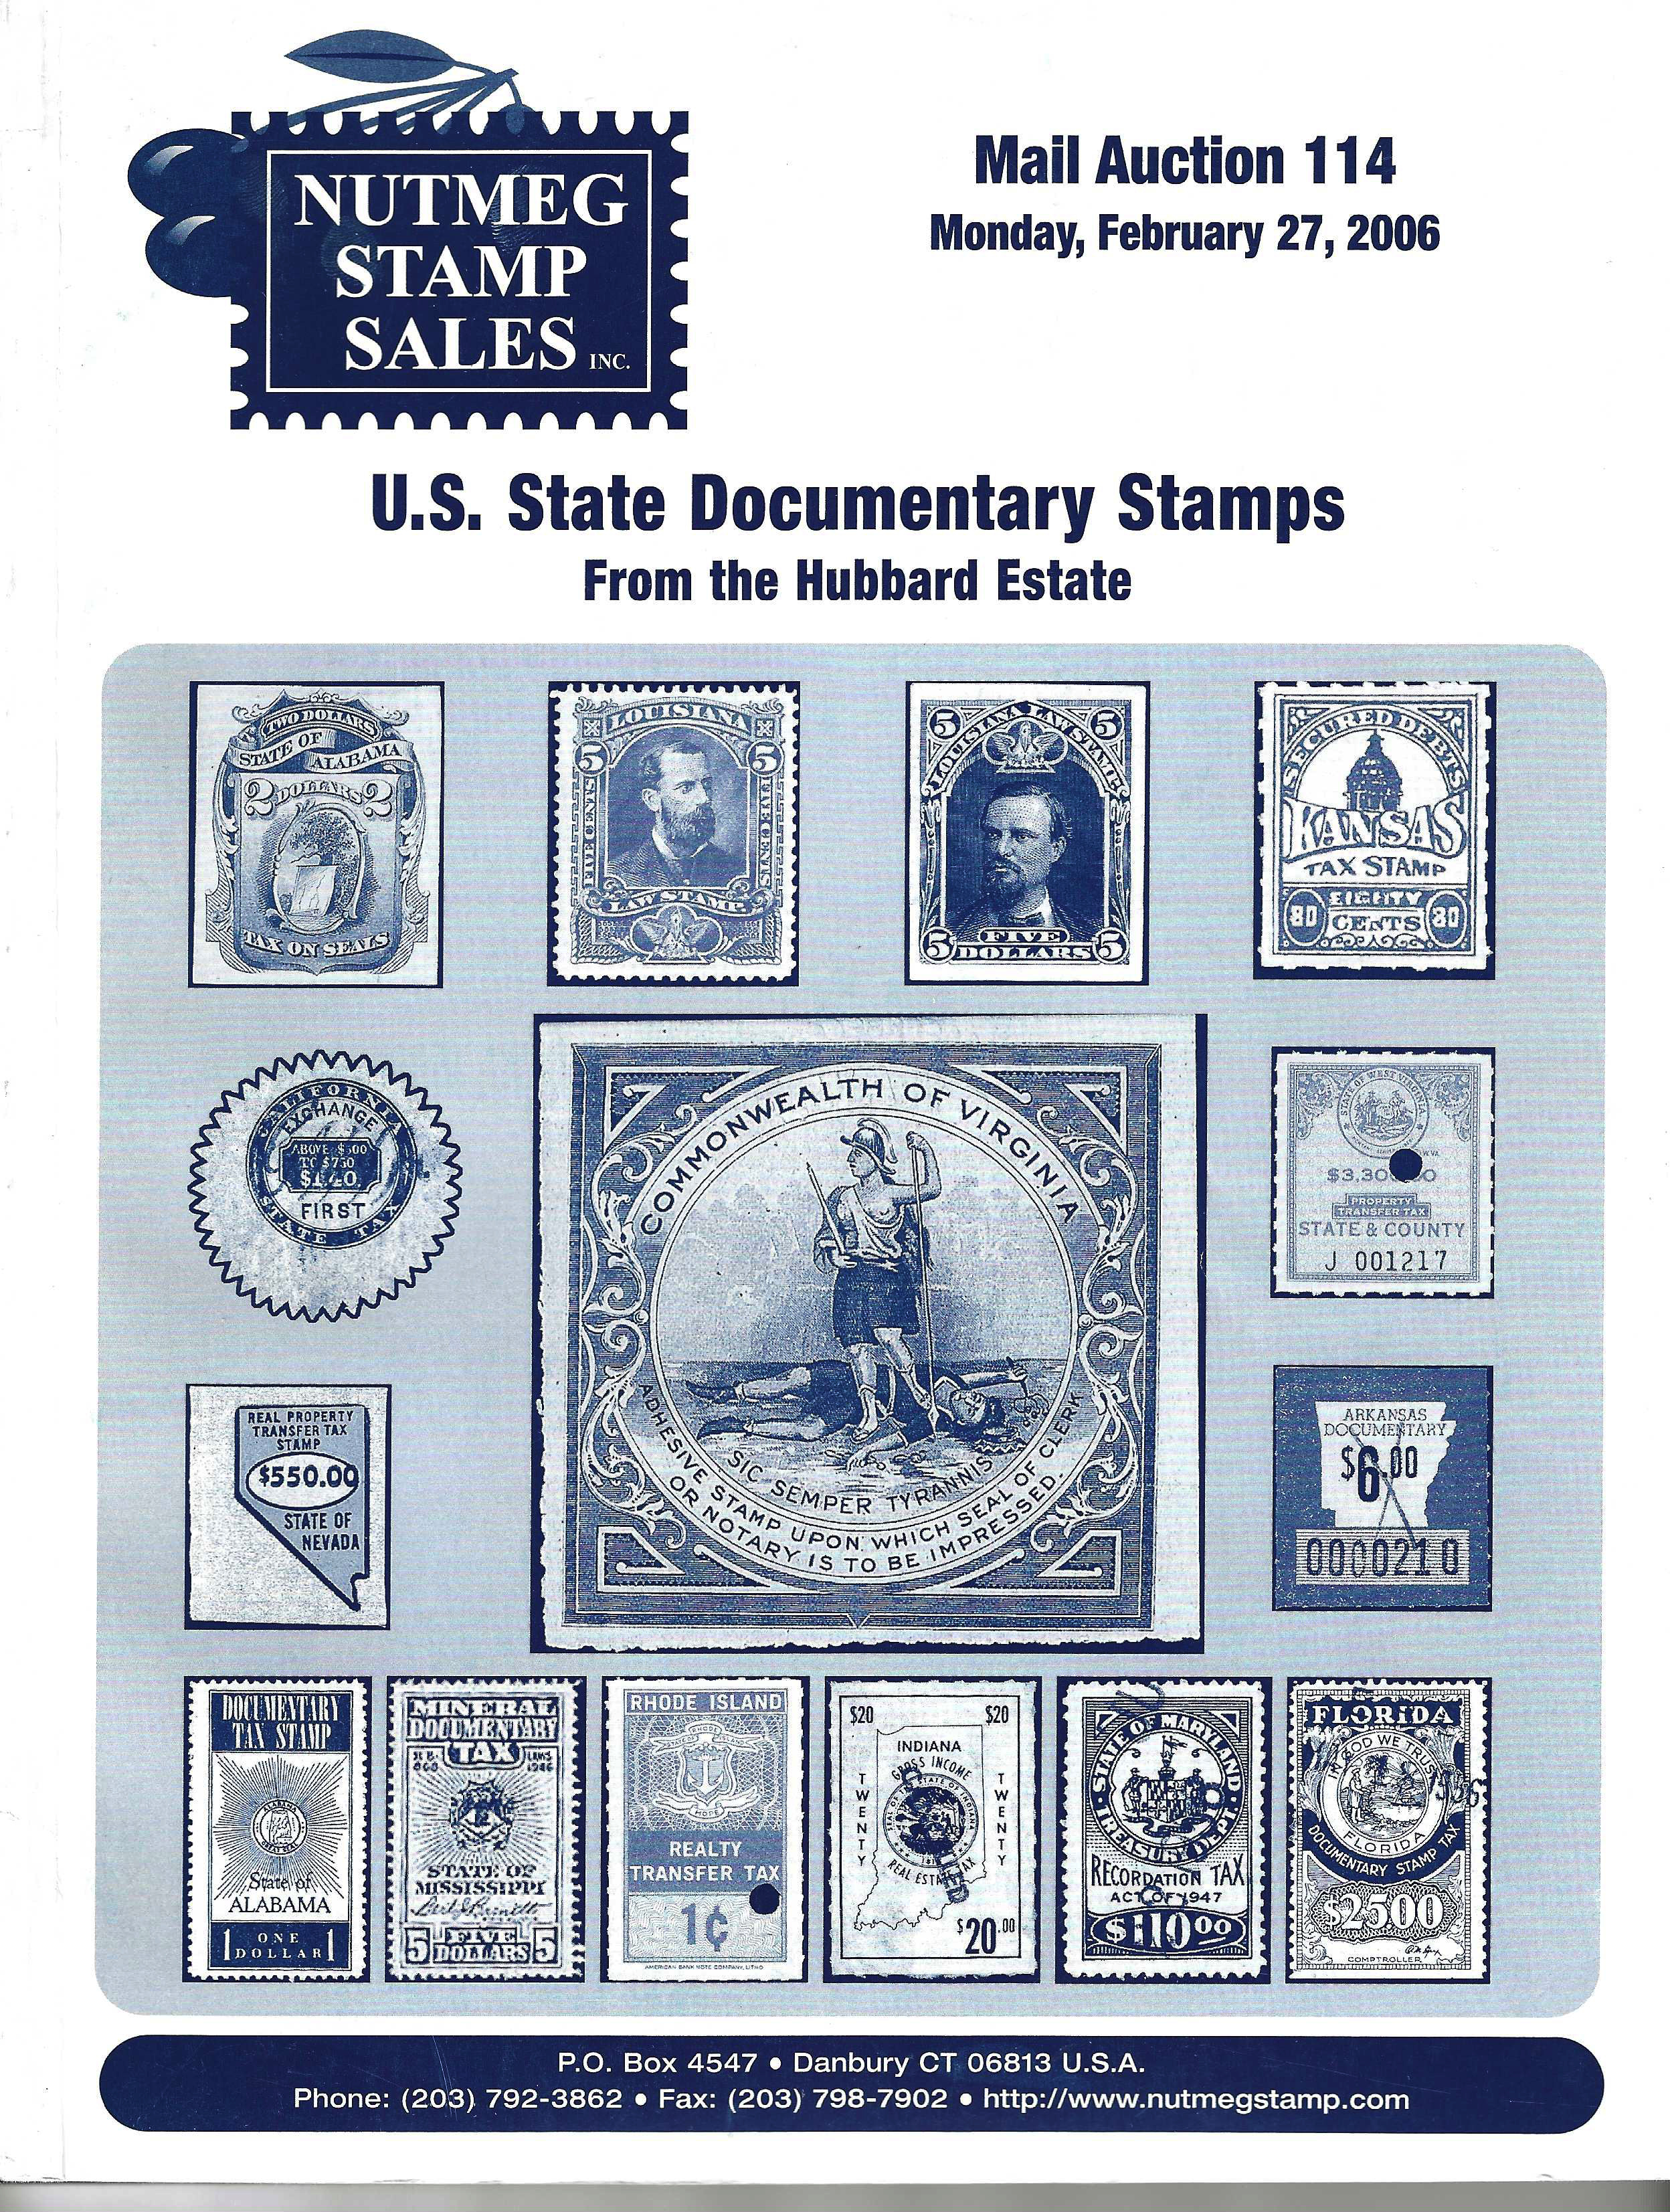 publication Nutmeg 2006 Mail Auction 114 U.S. State Documentary Stamps 